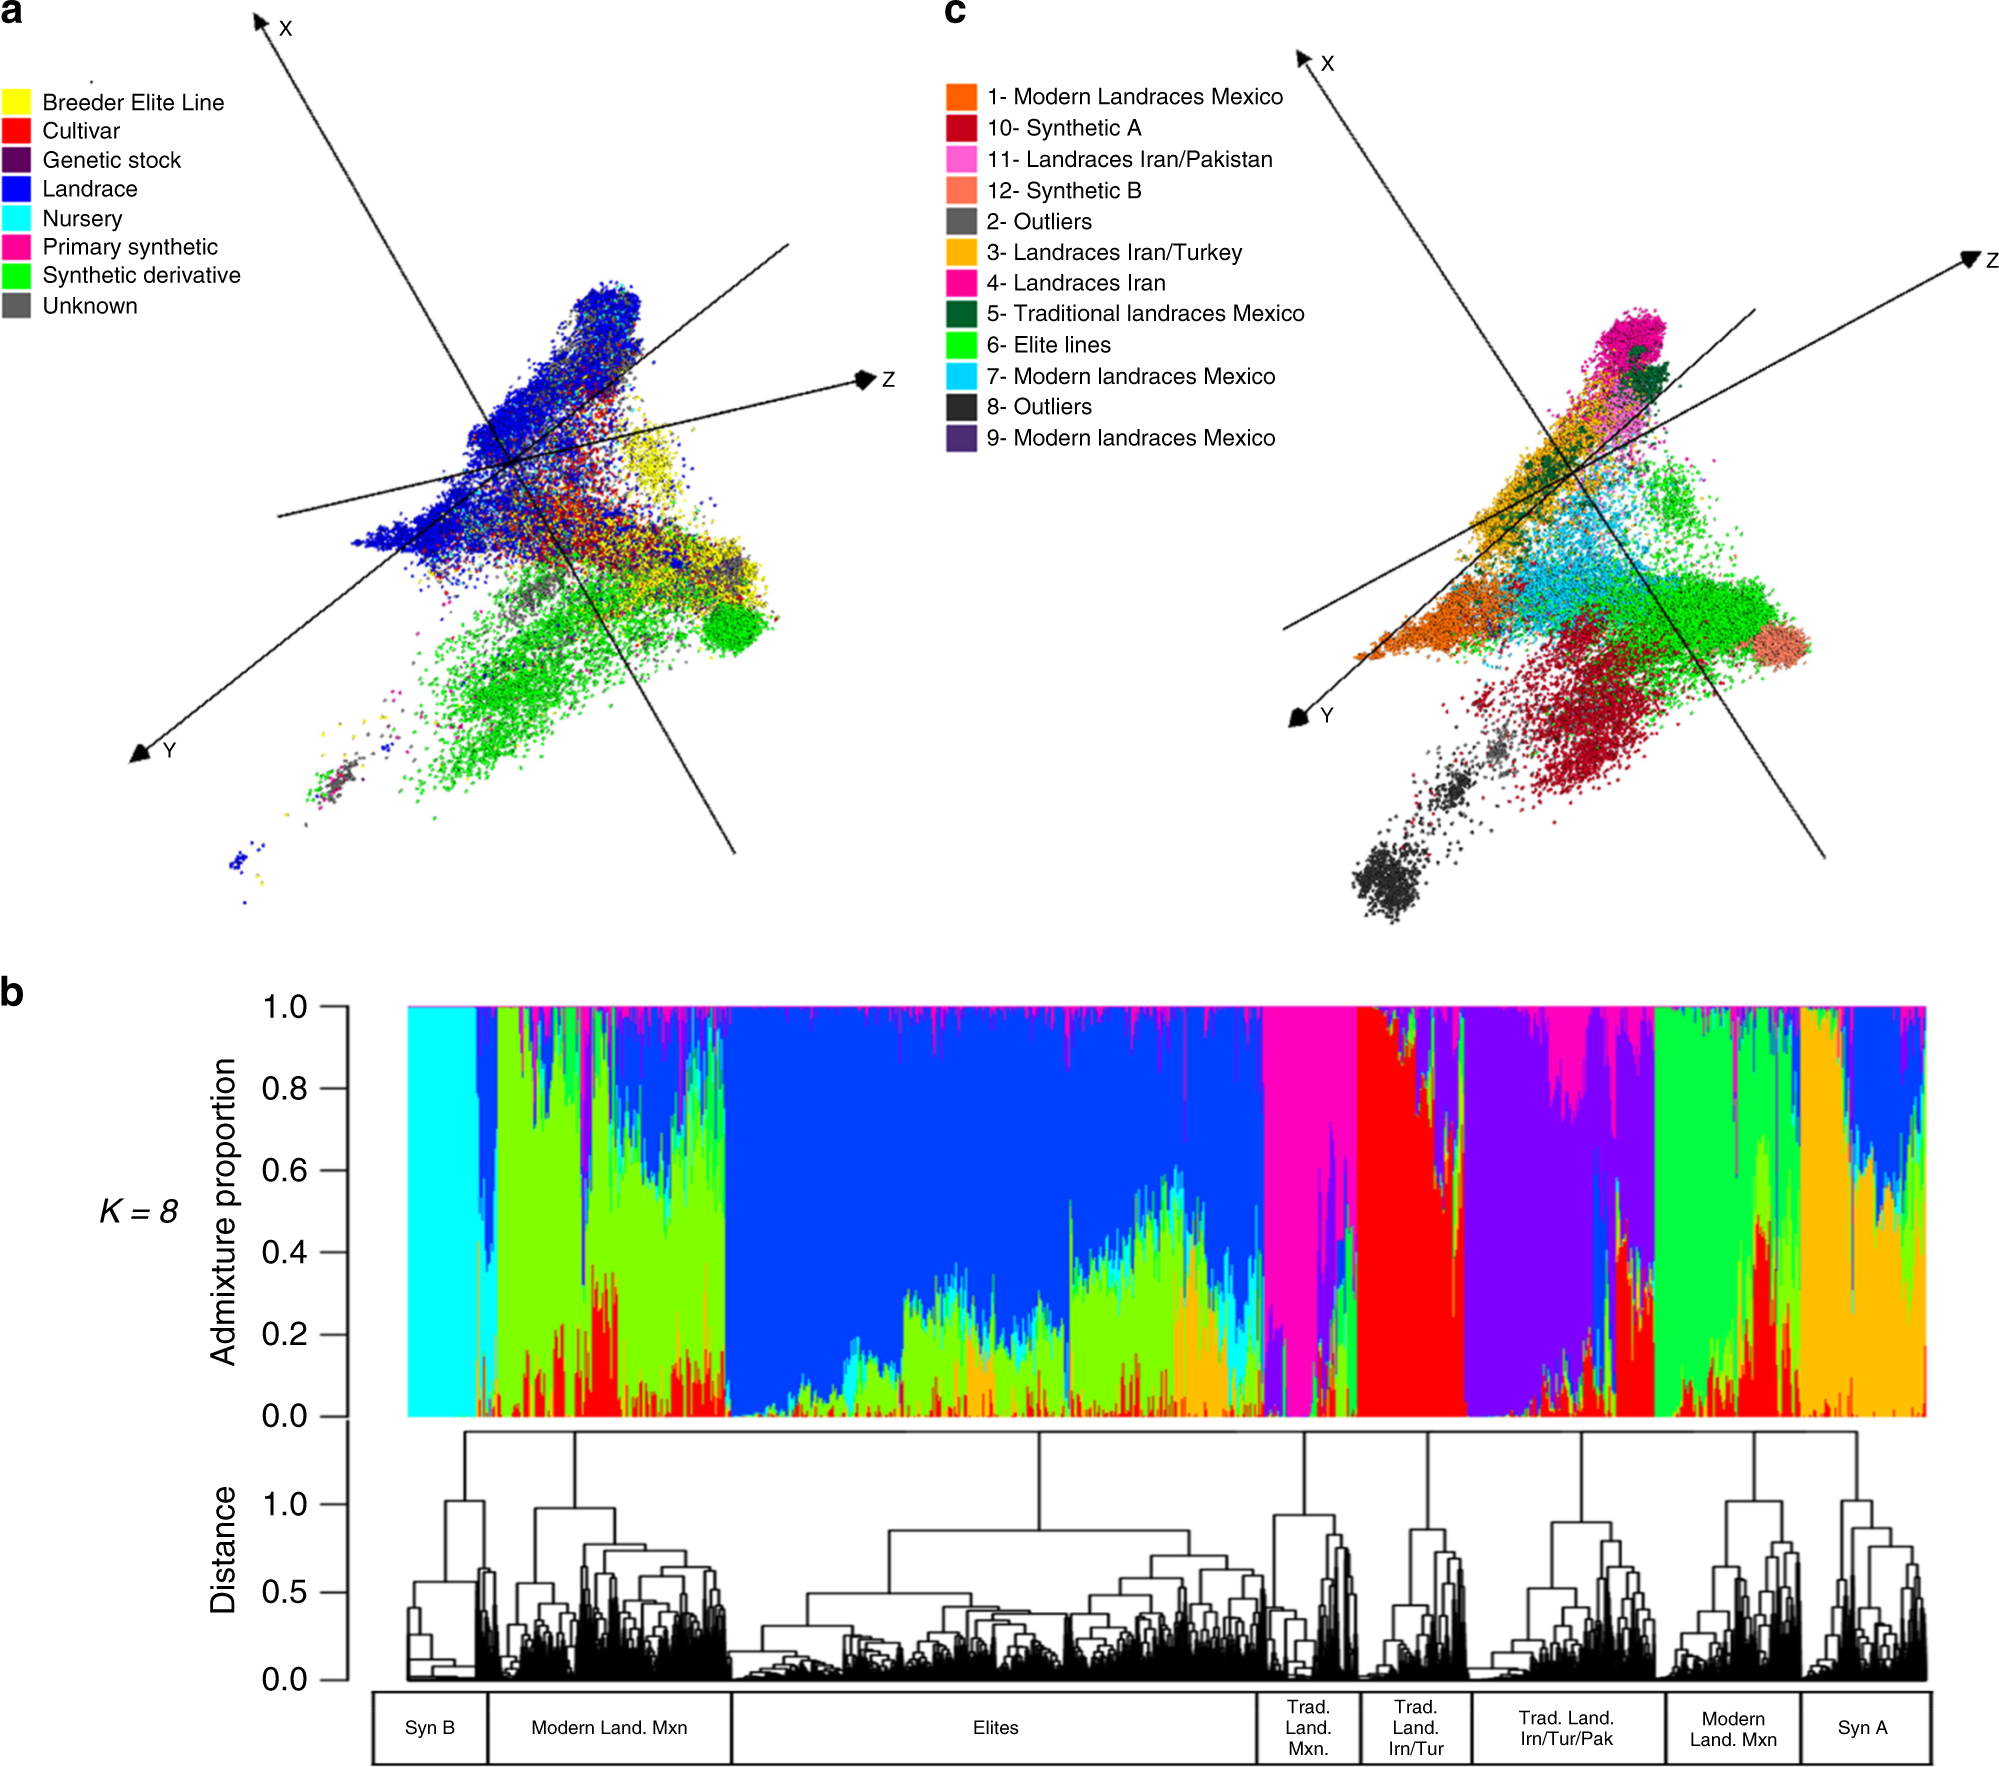 Mose antik klamre sig Diversity analysis of 80,000 wheat accessions reveals consequences and  opportunities of selection footprints | Nature Communications